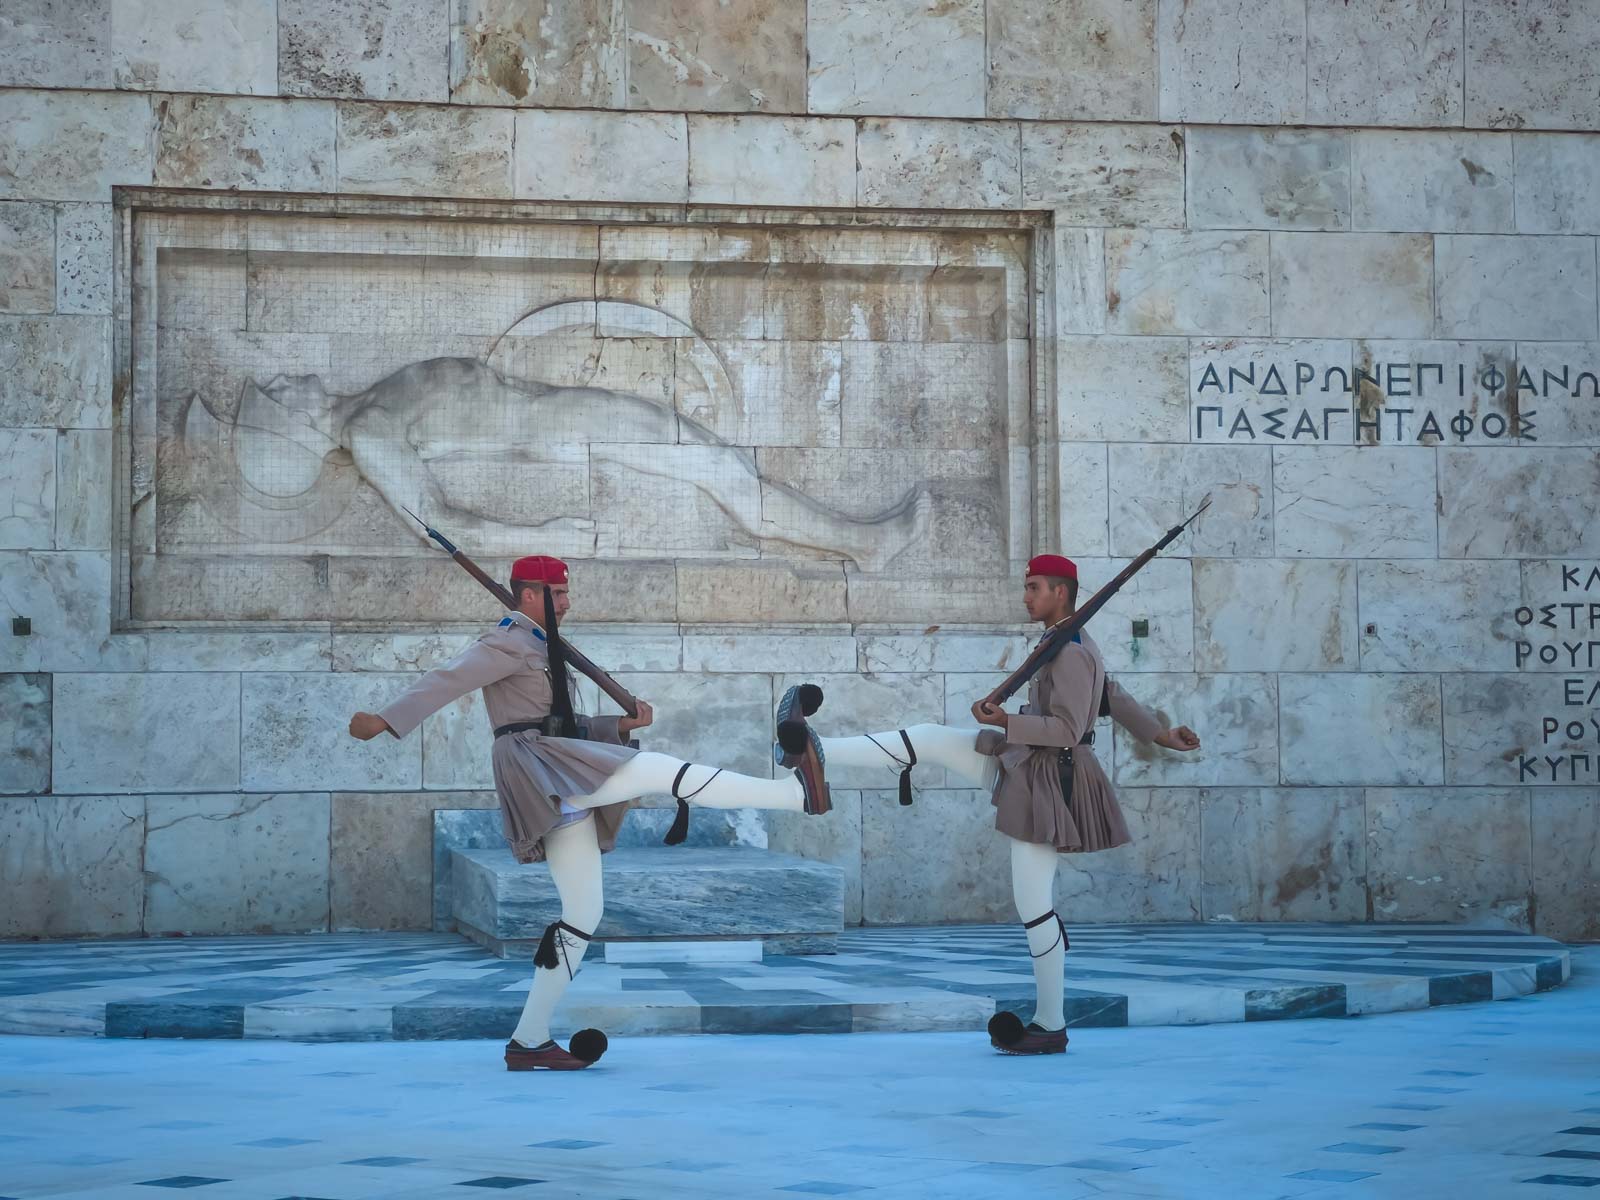 Changing of the guard in athens